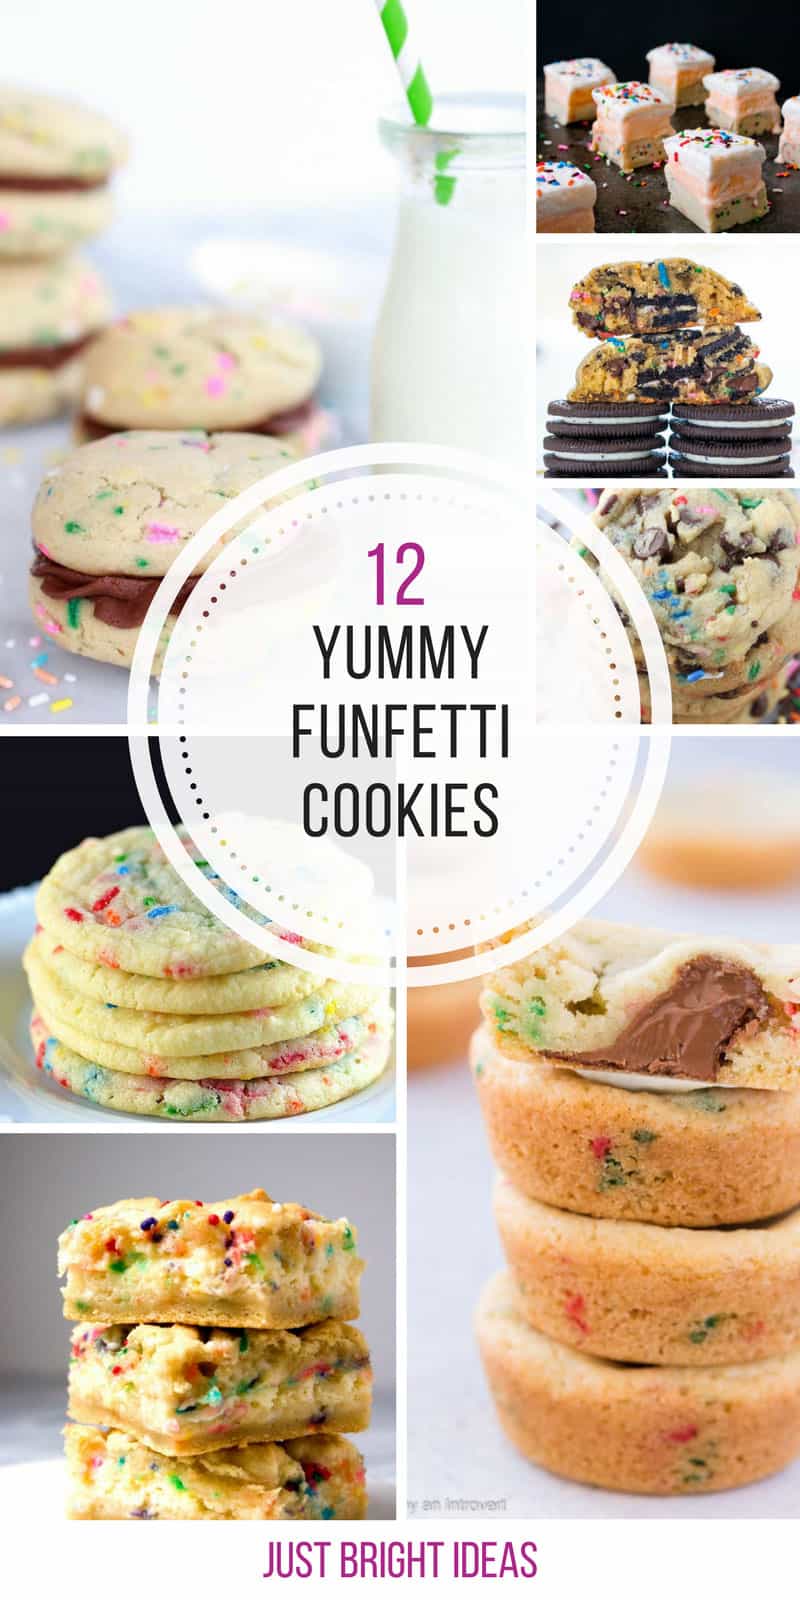 These really are the best funfetti cookies!